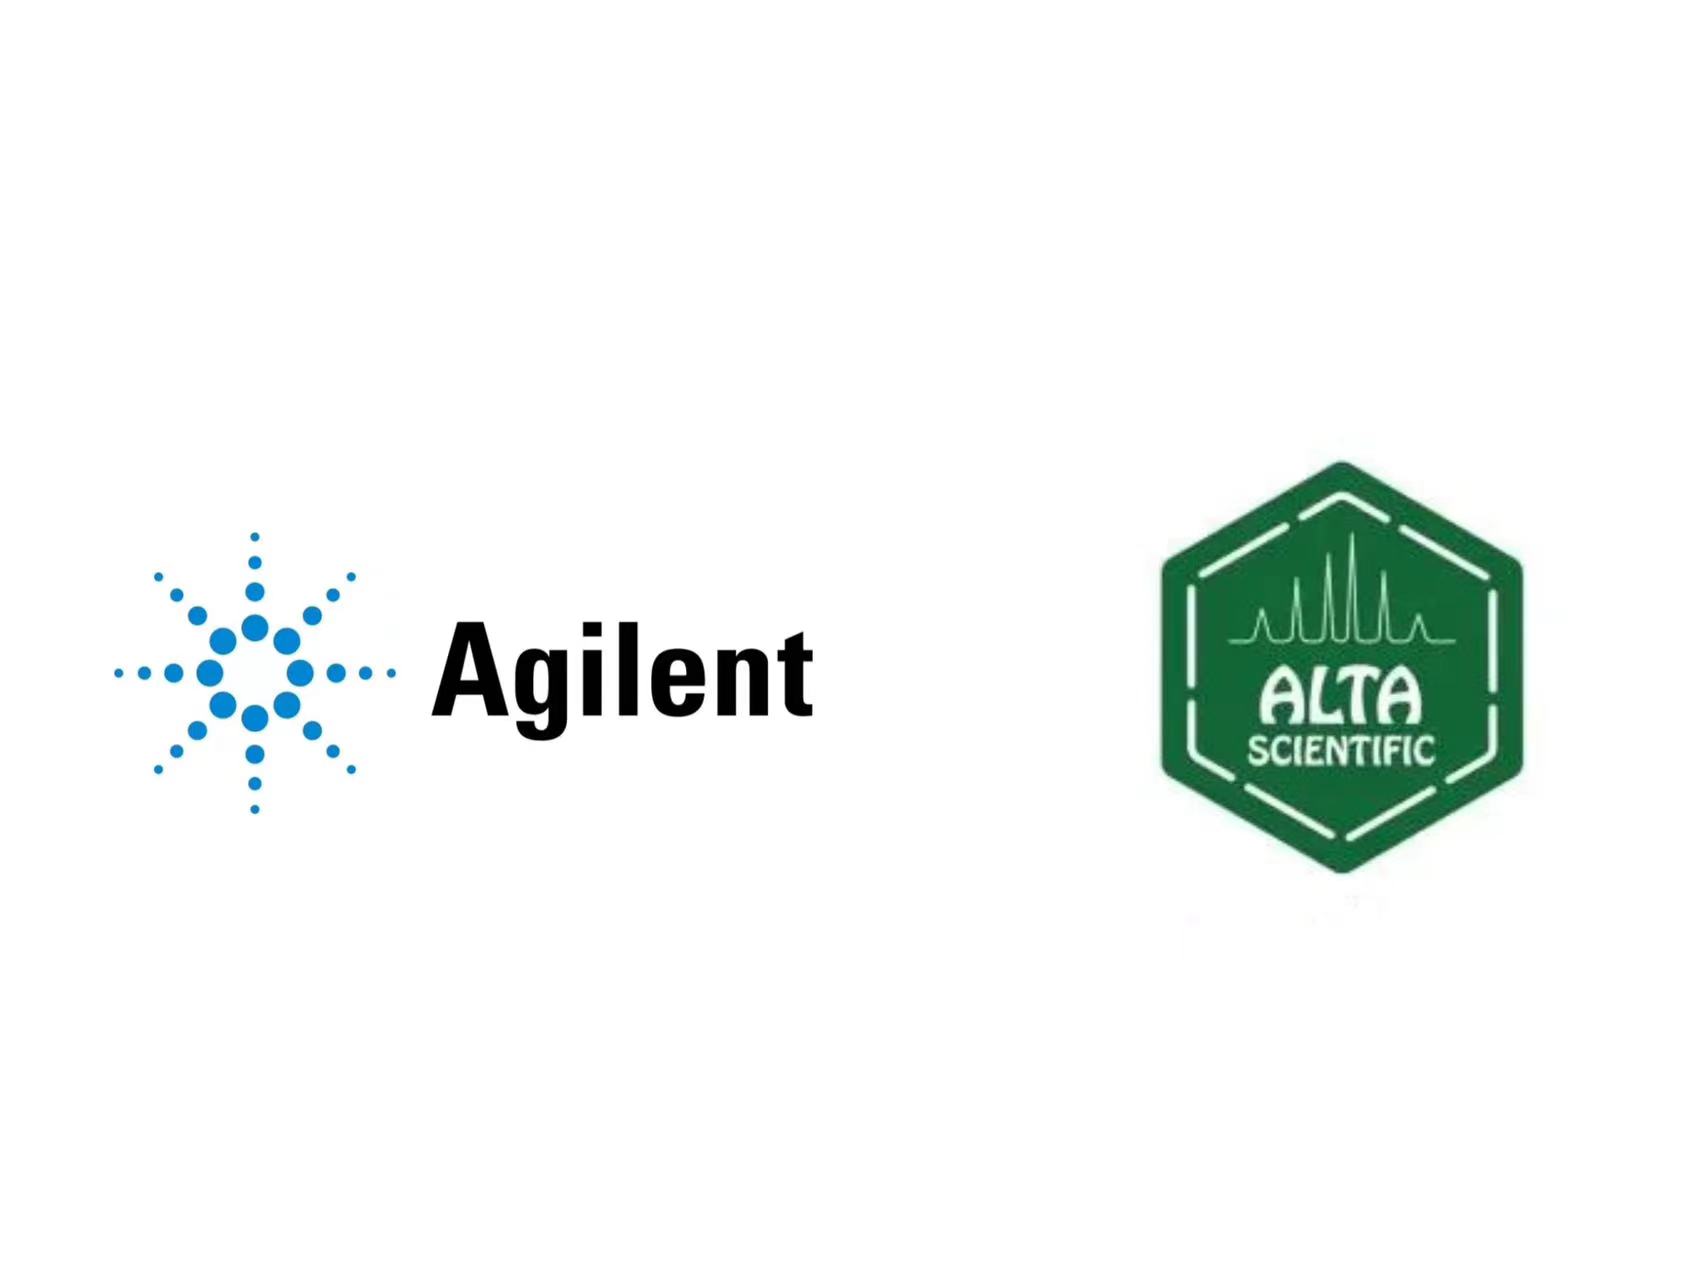 Agilent and Alta Scientific to codevelop an innovation lab